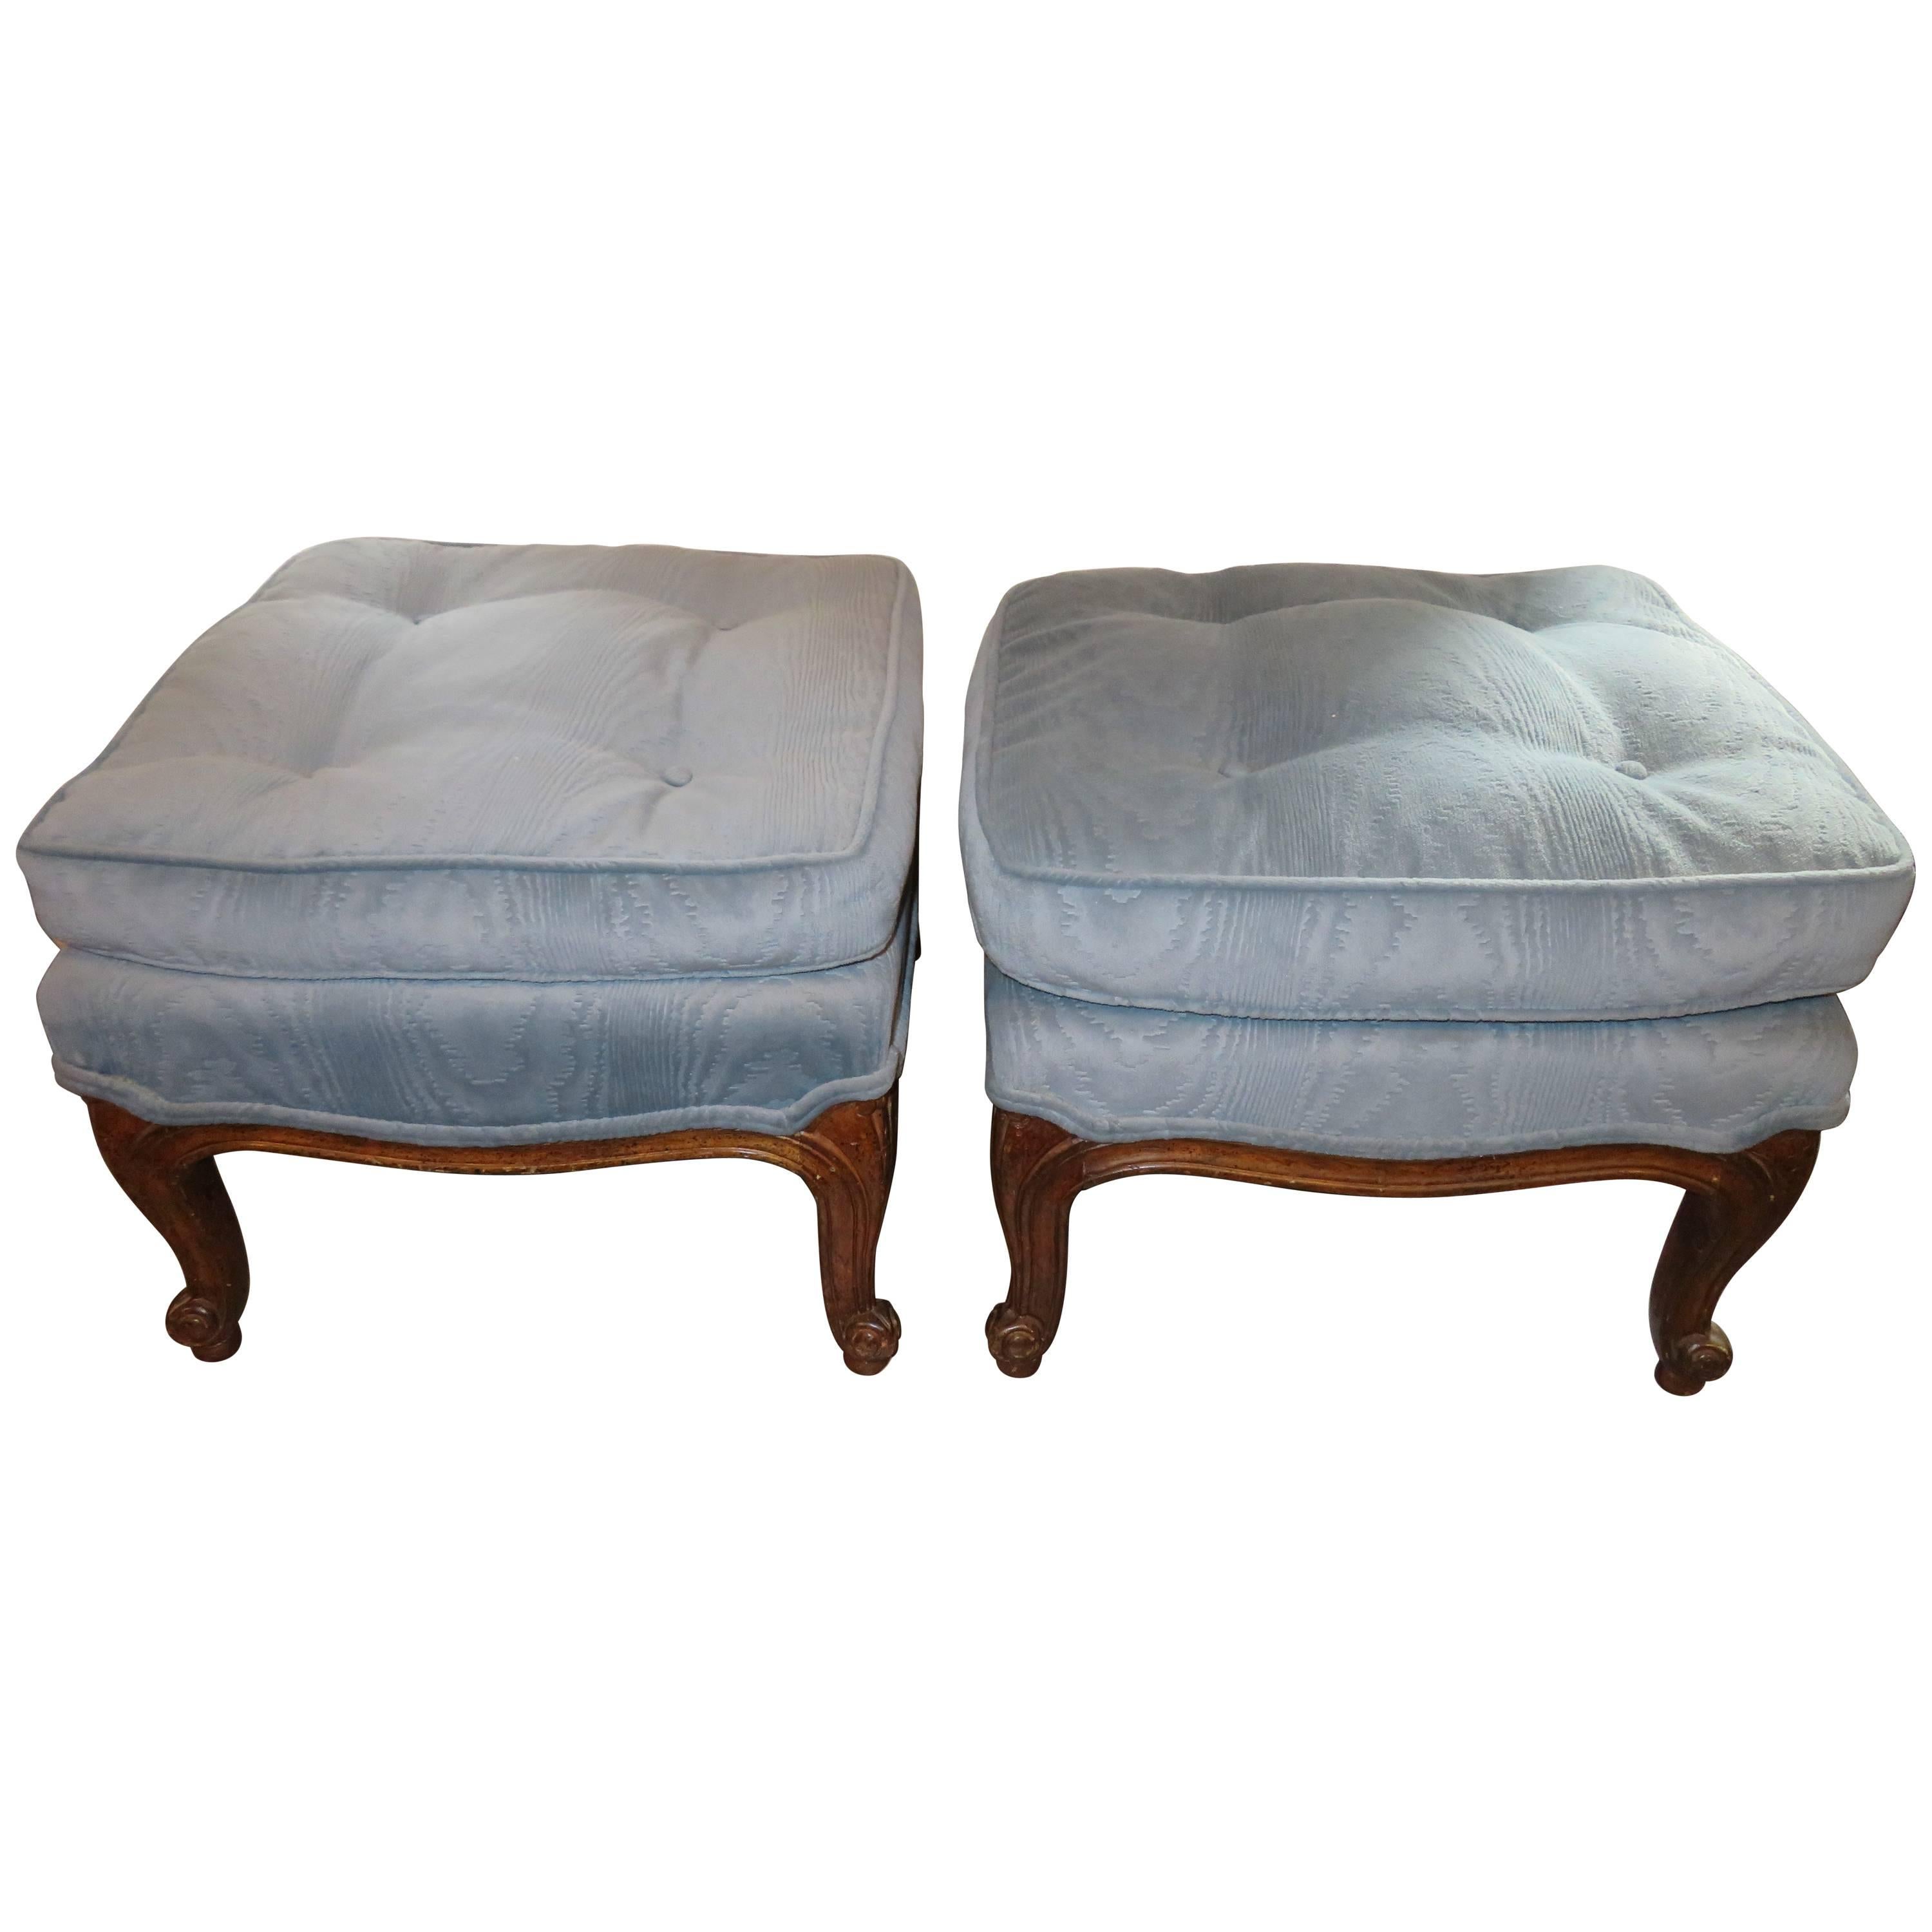 Lovely Pair of French Provincial Square Ottoman Bench Mid-Century Modern